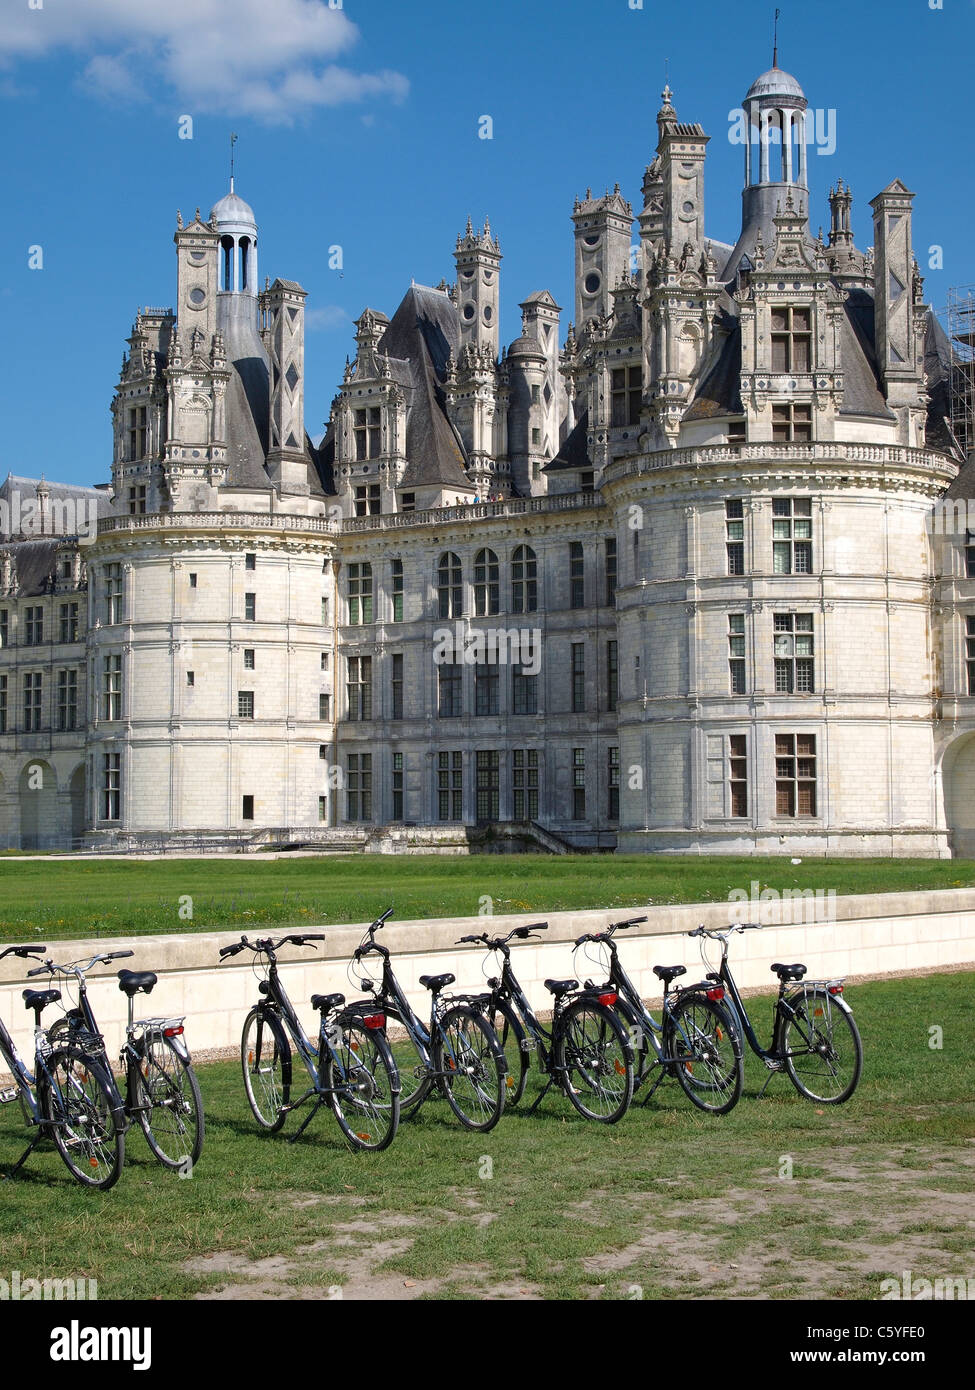 Bicycles parked in front of the Chateau Royal de Chambord, Loire valley, France Stock Photo